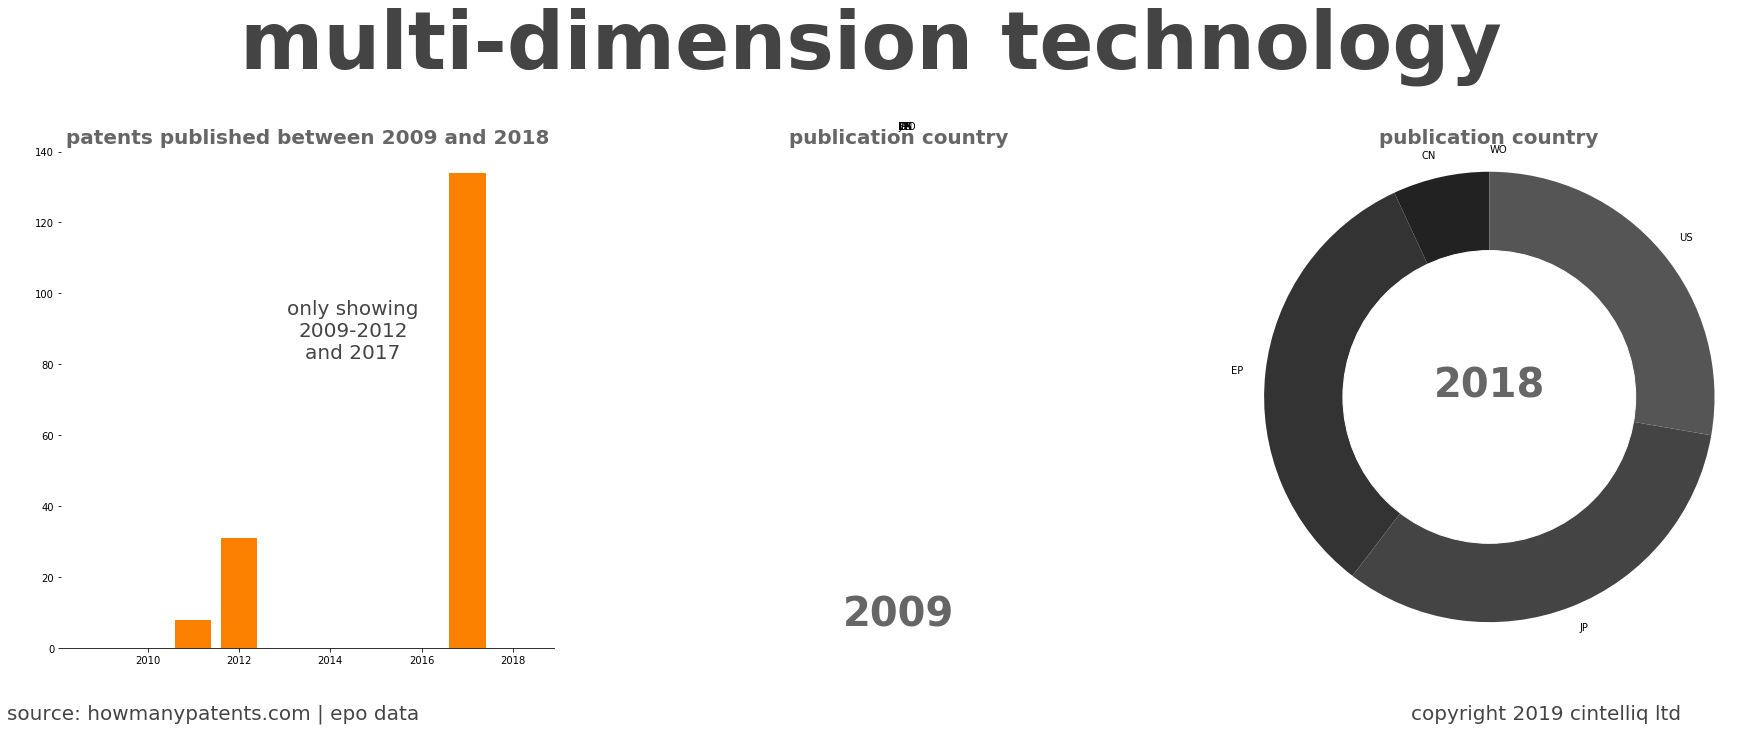 summary of patents for Multi-Dimension Technology